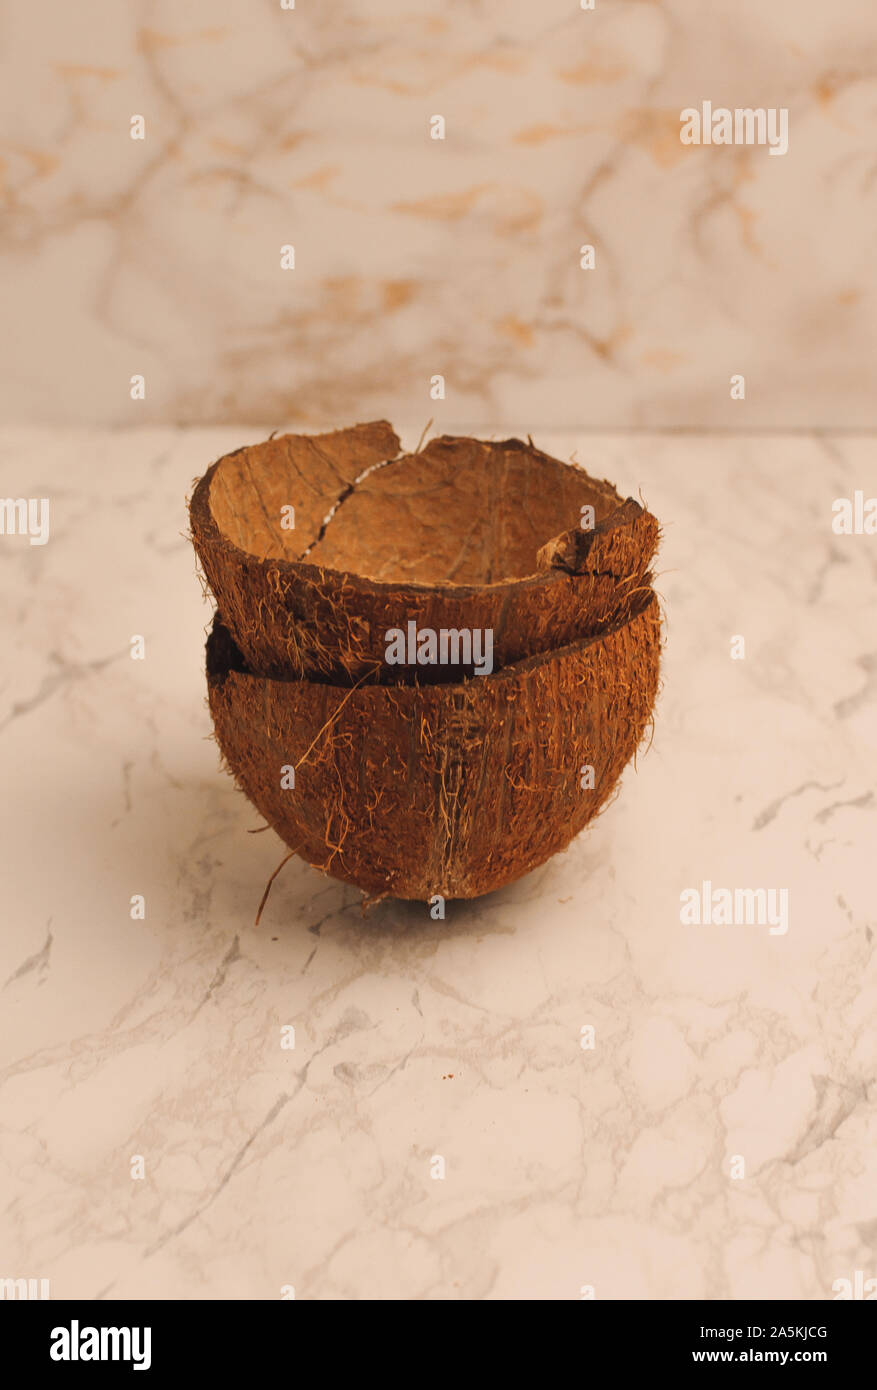 two halves of a coconut shell on a marble background, isolate. Future food bowls zero waste. Environmentally friendly material for utensils. Copy Stock Photo